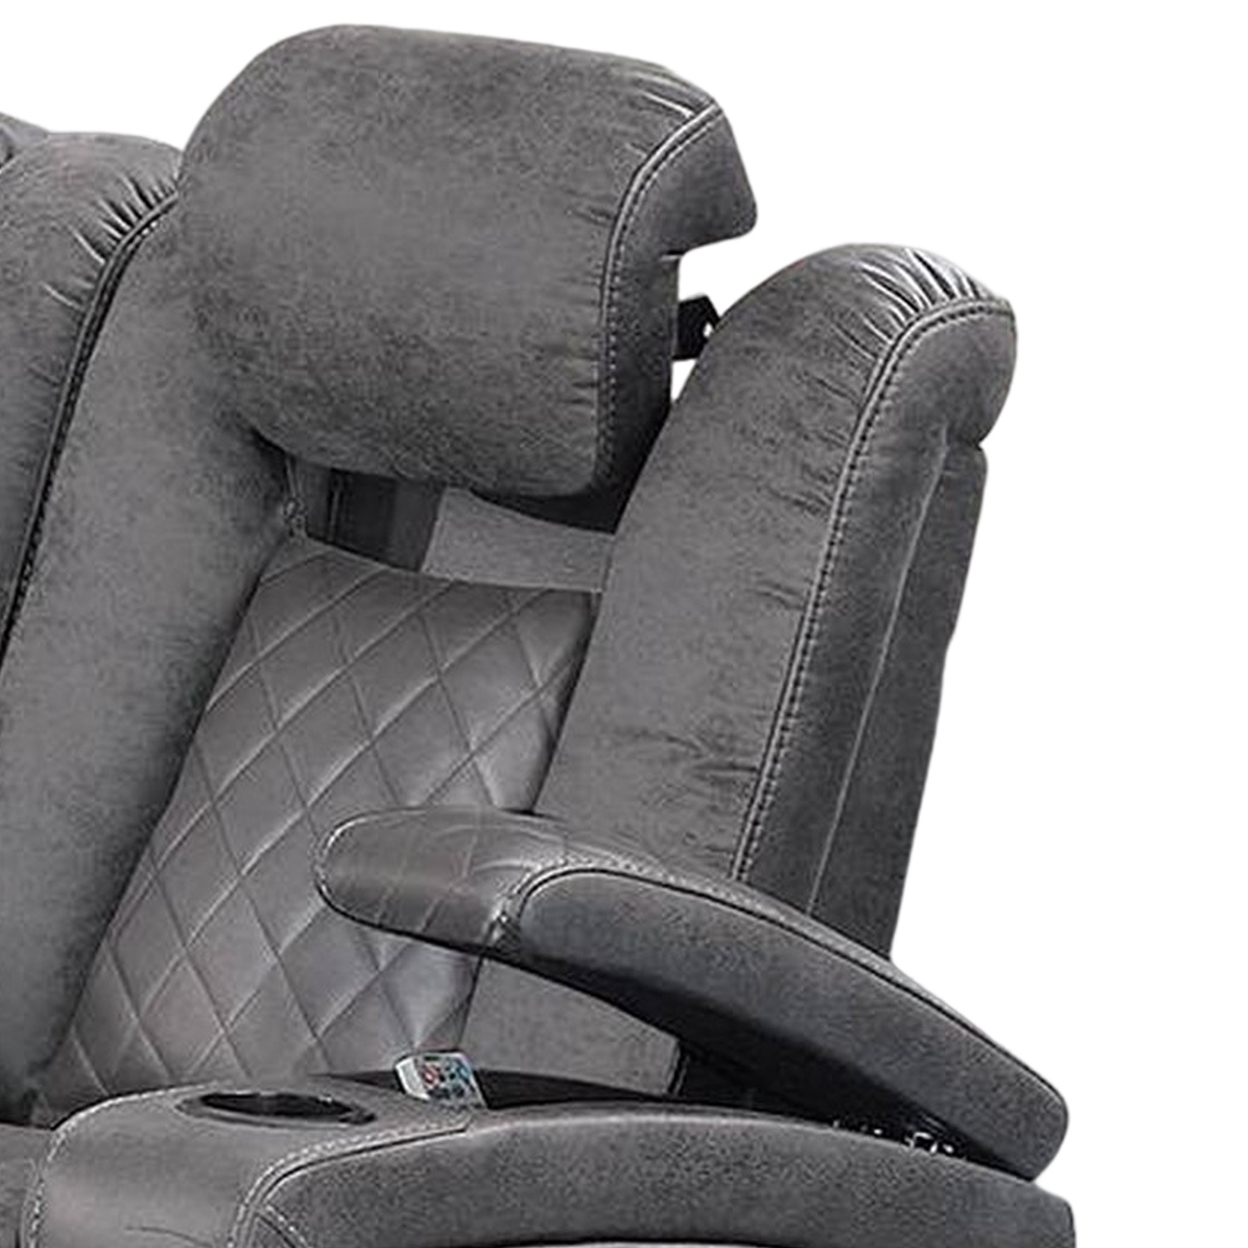 Elva 83 Inch Power Reclining Sofa, Storage Console, Gray Breathable Leather